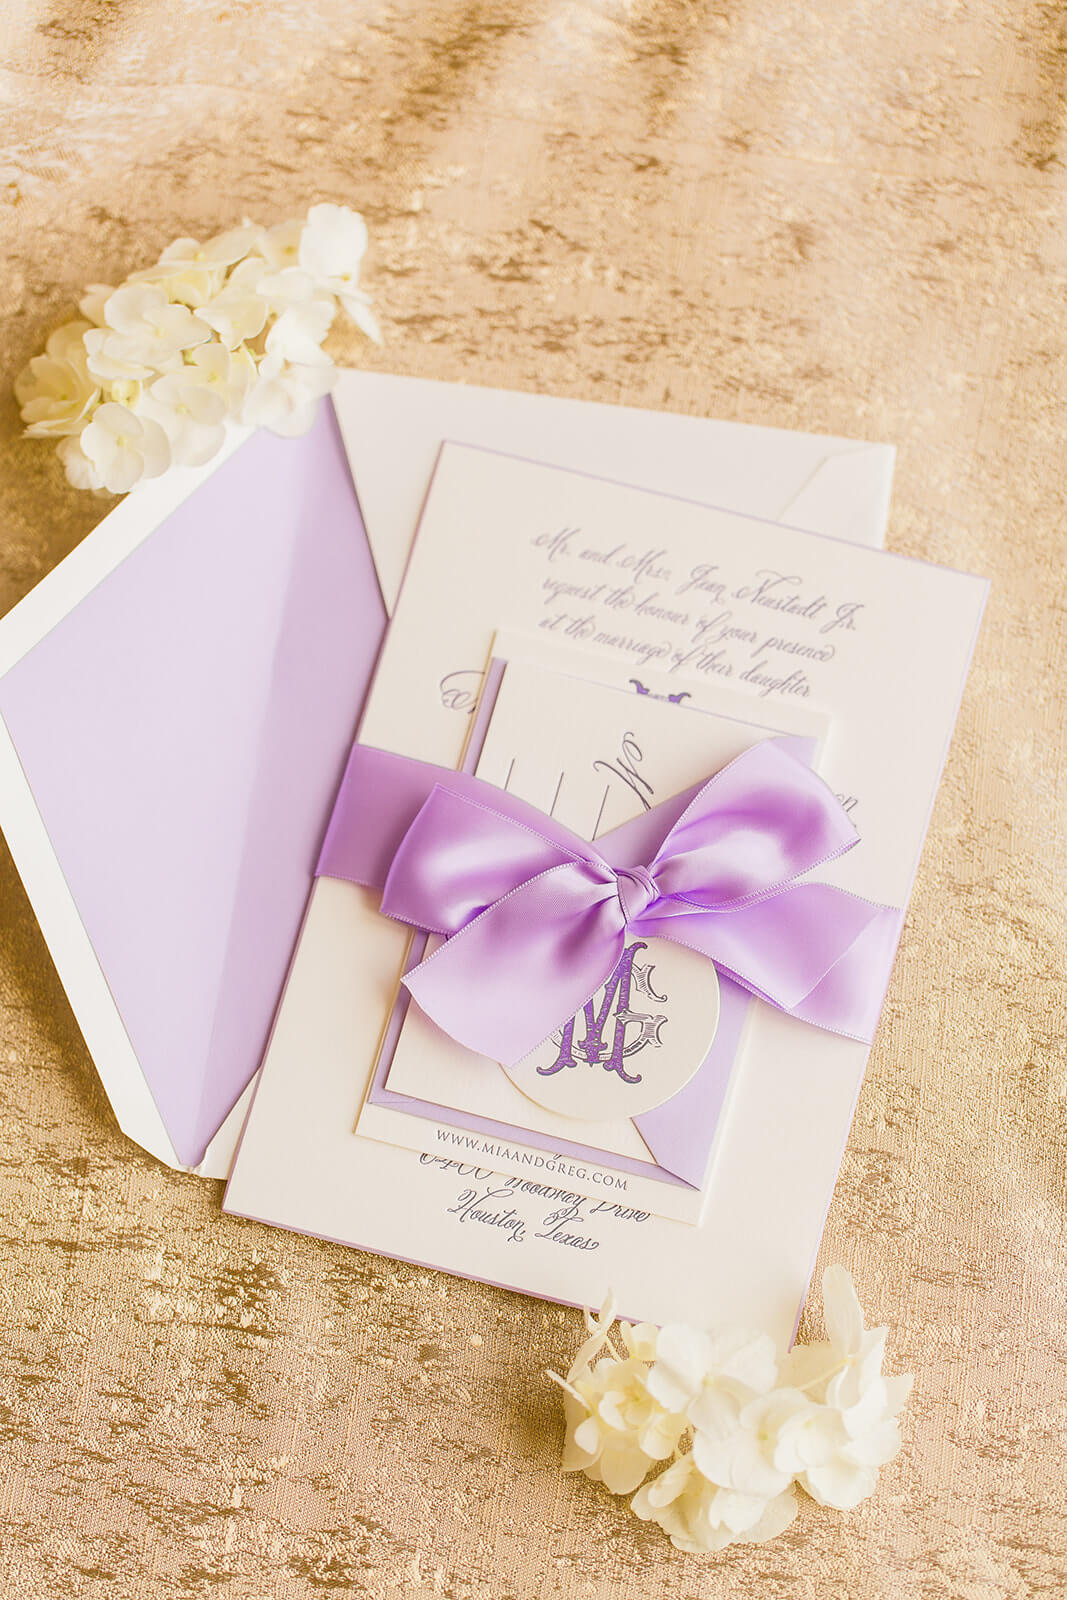 Lovely lavender letterpress wedding invitation with bow